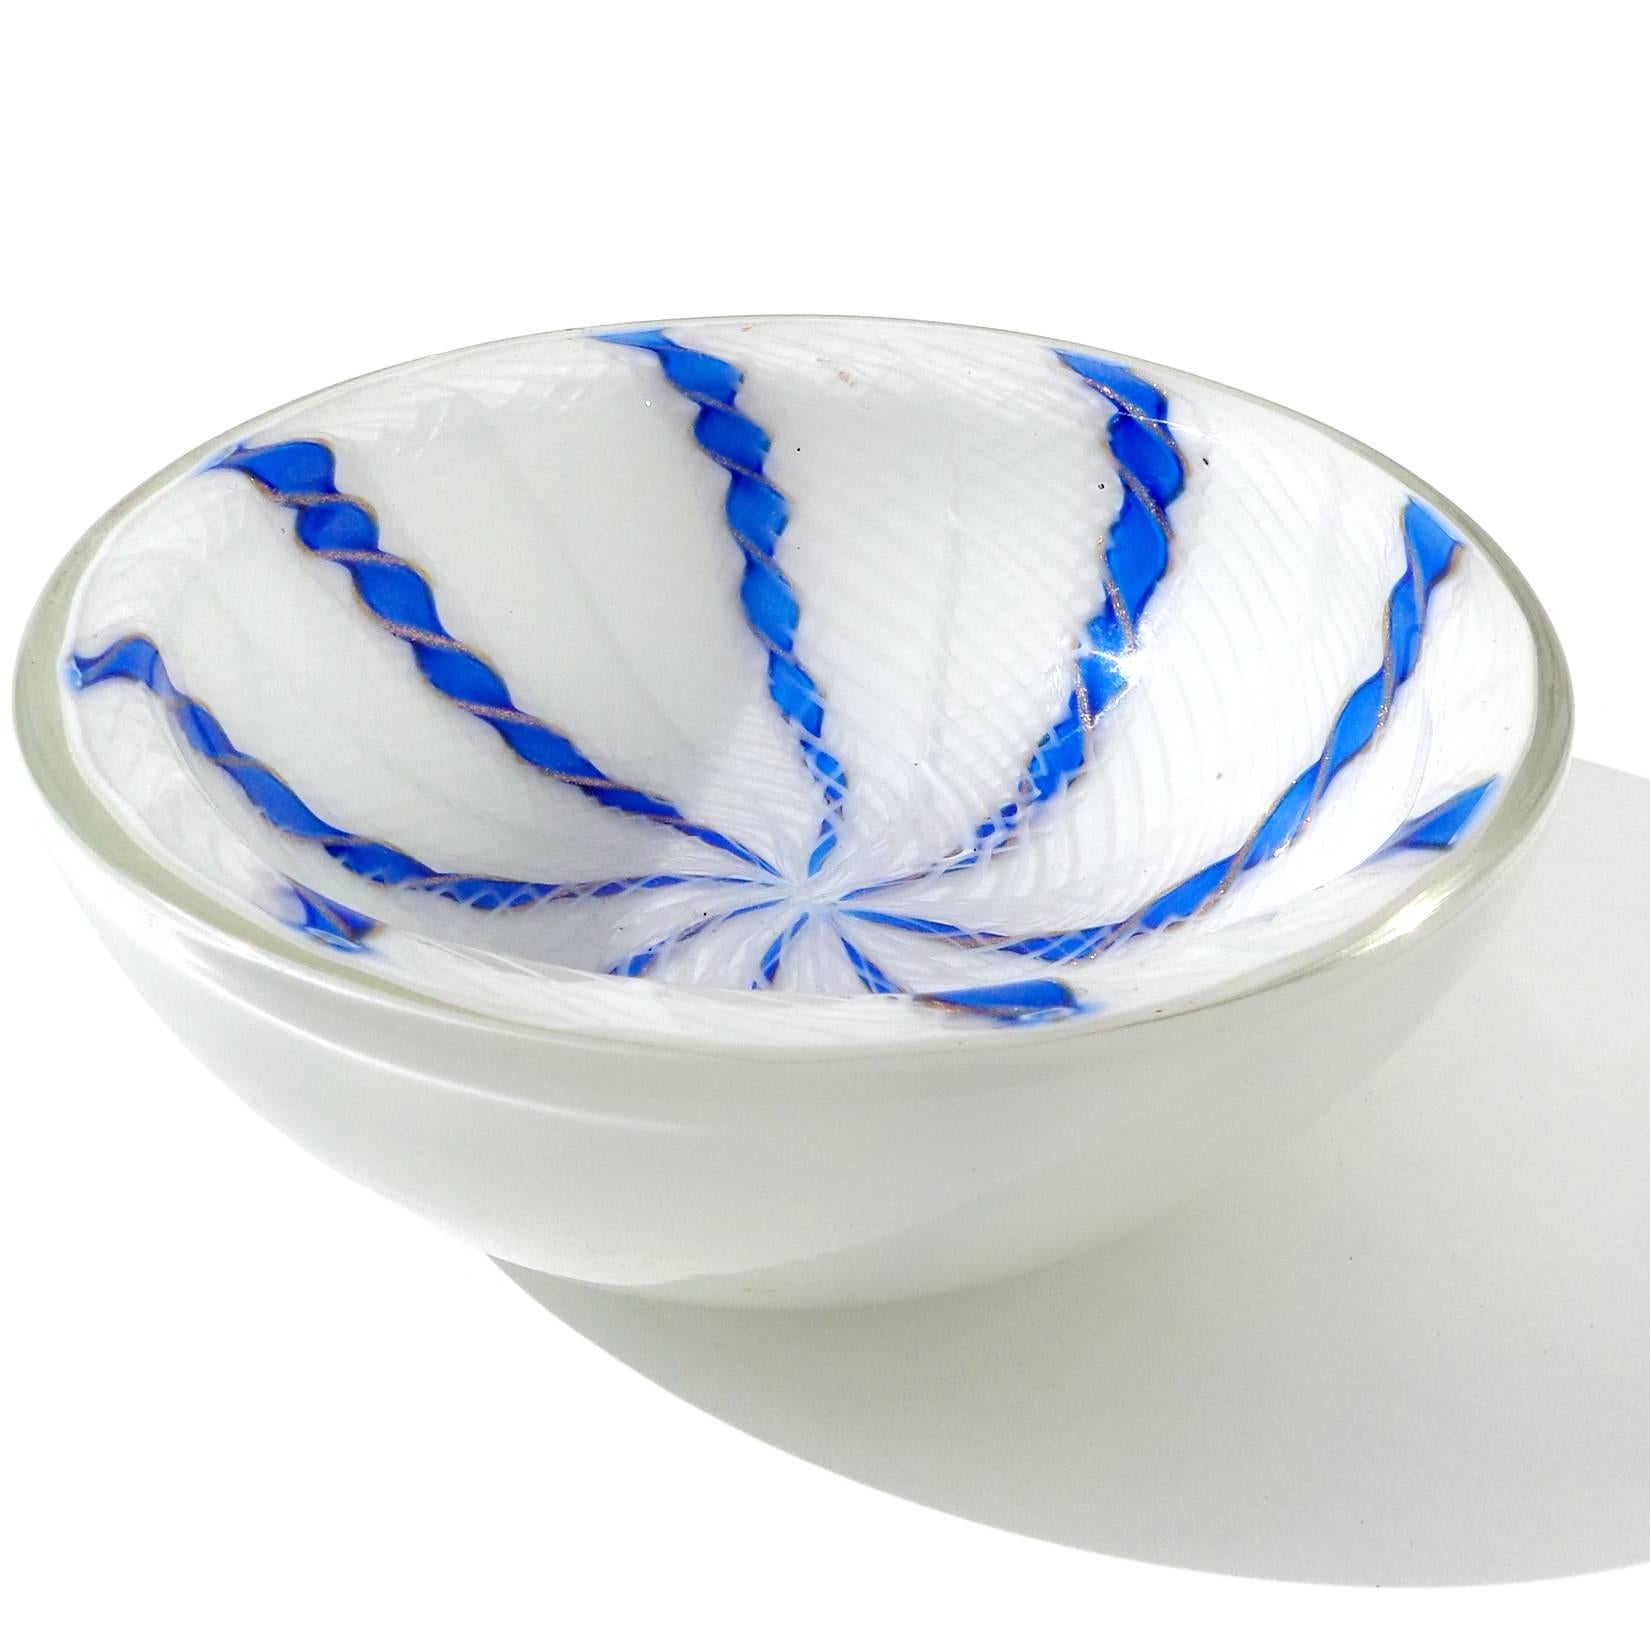 Beautiful vintage Murano hand blown white Zanfirico, cobalt blue and aventurine Latticino ribbons Italian art glass bowl. Would make a great candy or trinket dish for any table. The older label reads 